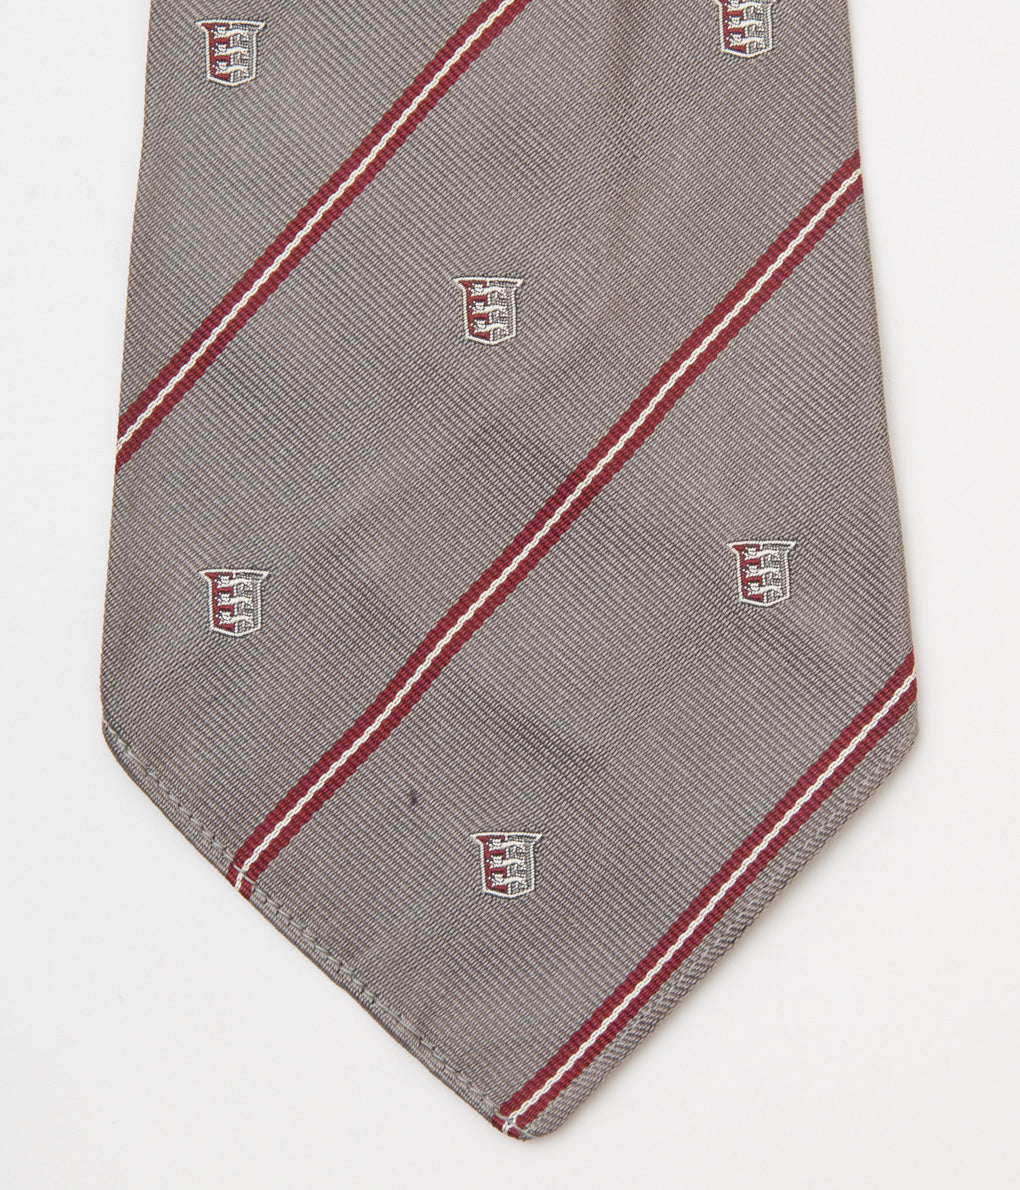 FROM USA "O'CONELL LUCAS-CHELF EMBROIDERED TIE CREST"(SILVER)